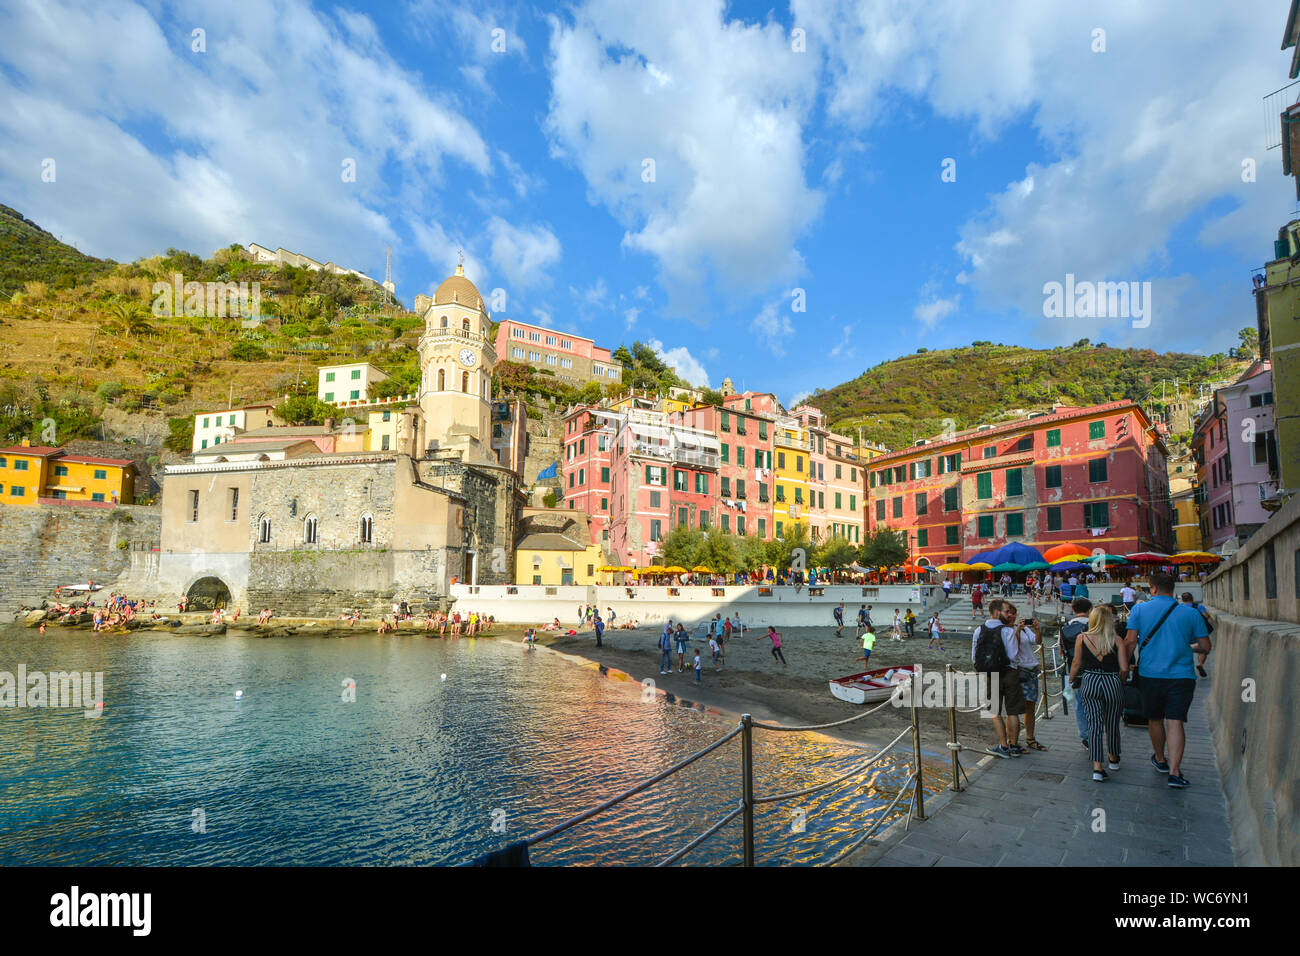 The harbour of Vernazza, Cinque Terre Italy, with kids playing on the beach, tourists enjoying the town and the church of Santa Margherita in the sun Stock Photo